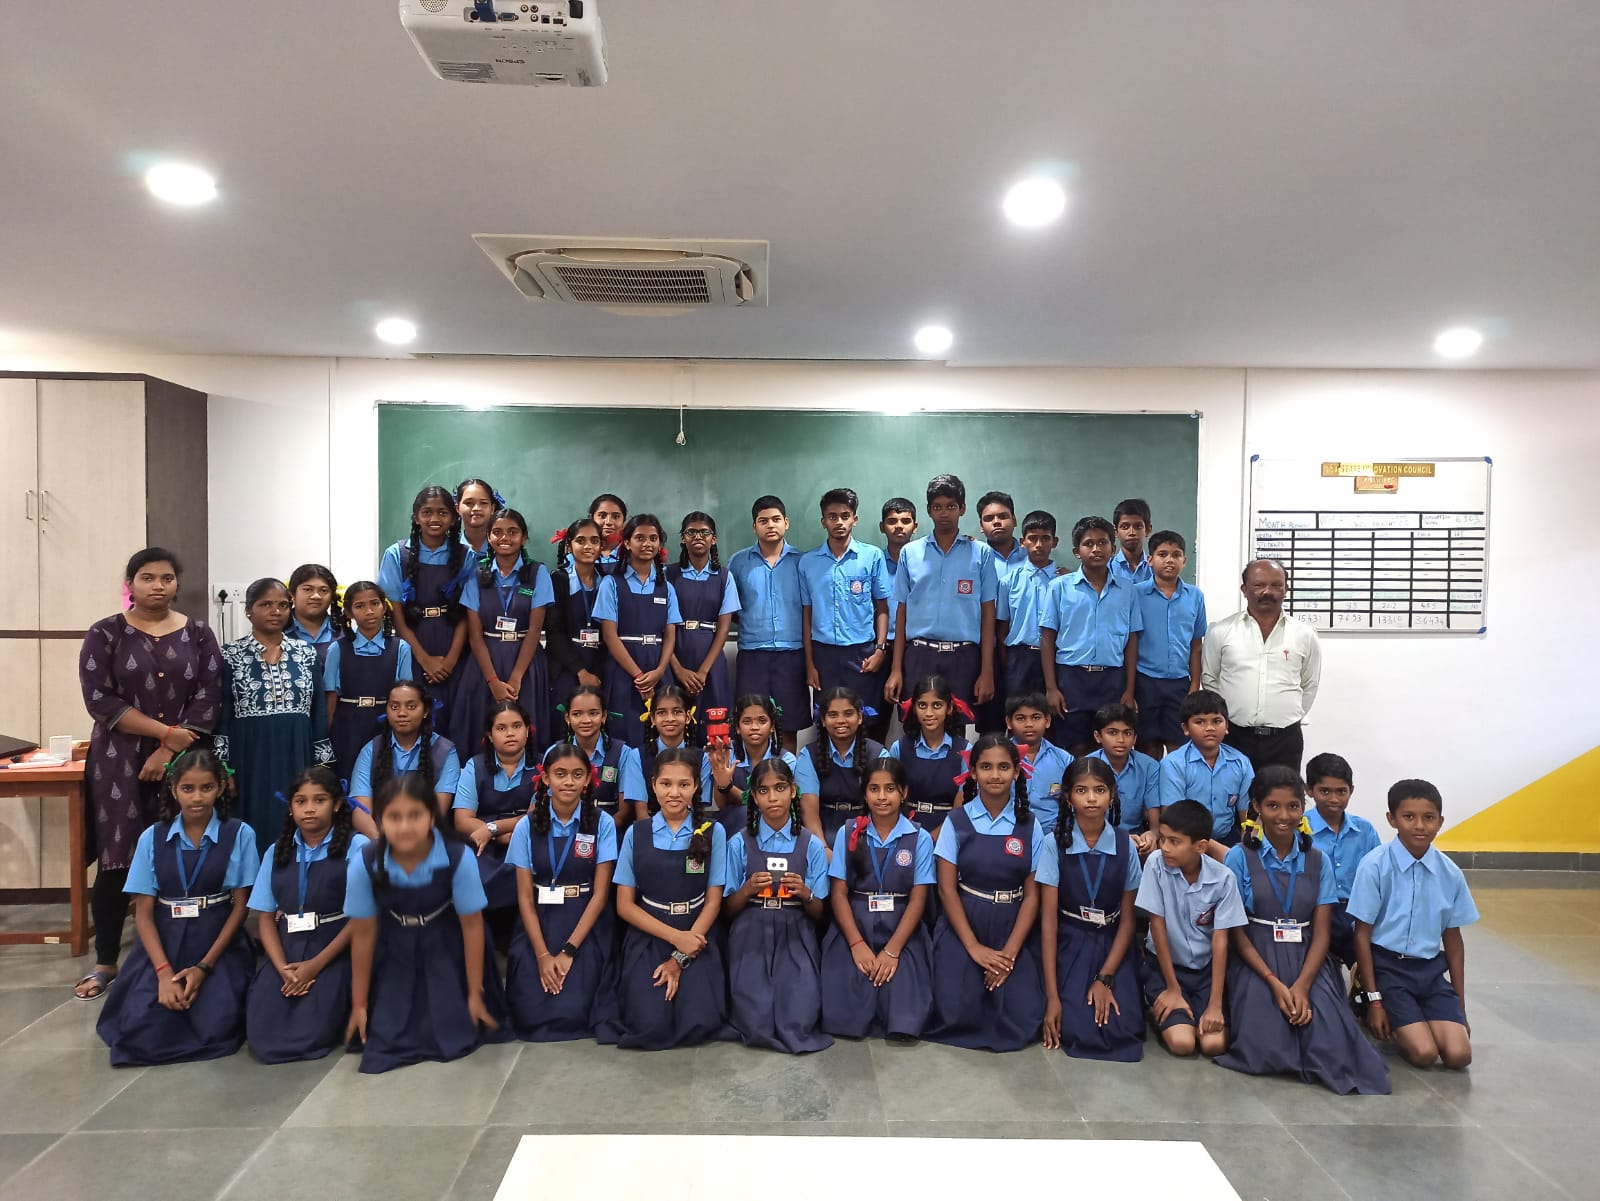 Think, Design and Prototyping and 3D Printing and Robotics Workshop for Government High School, Menkurem, Bicholim-Goa